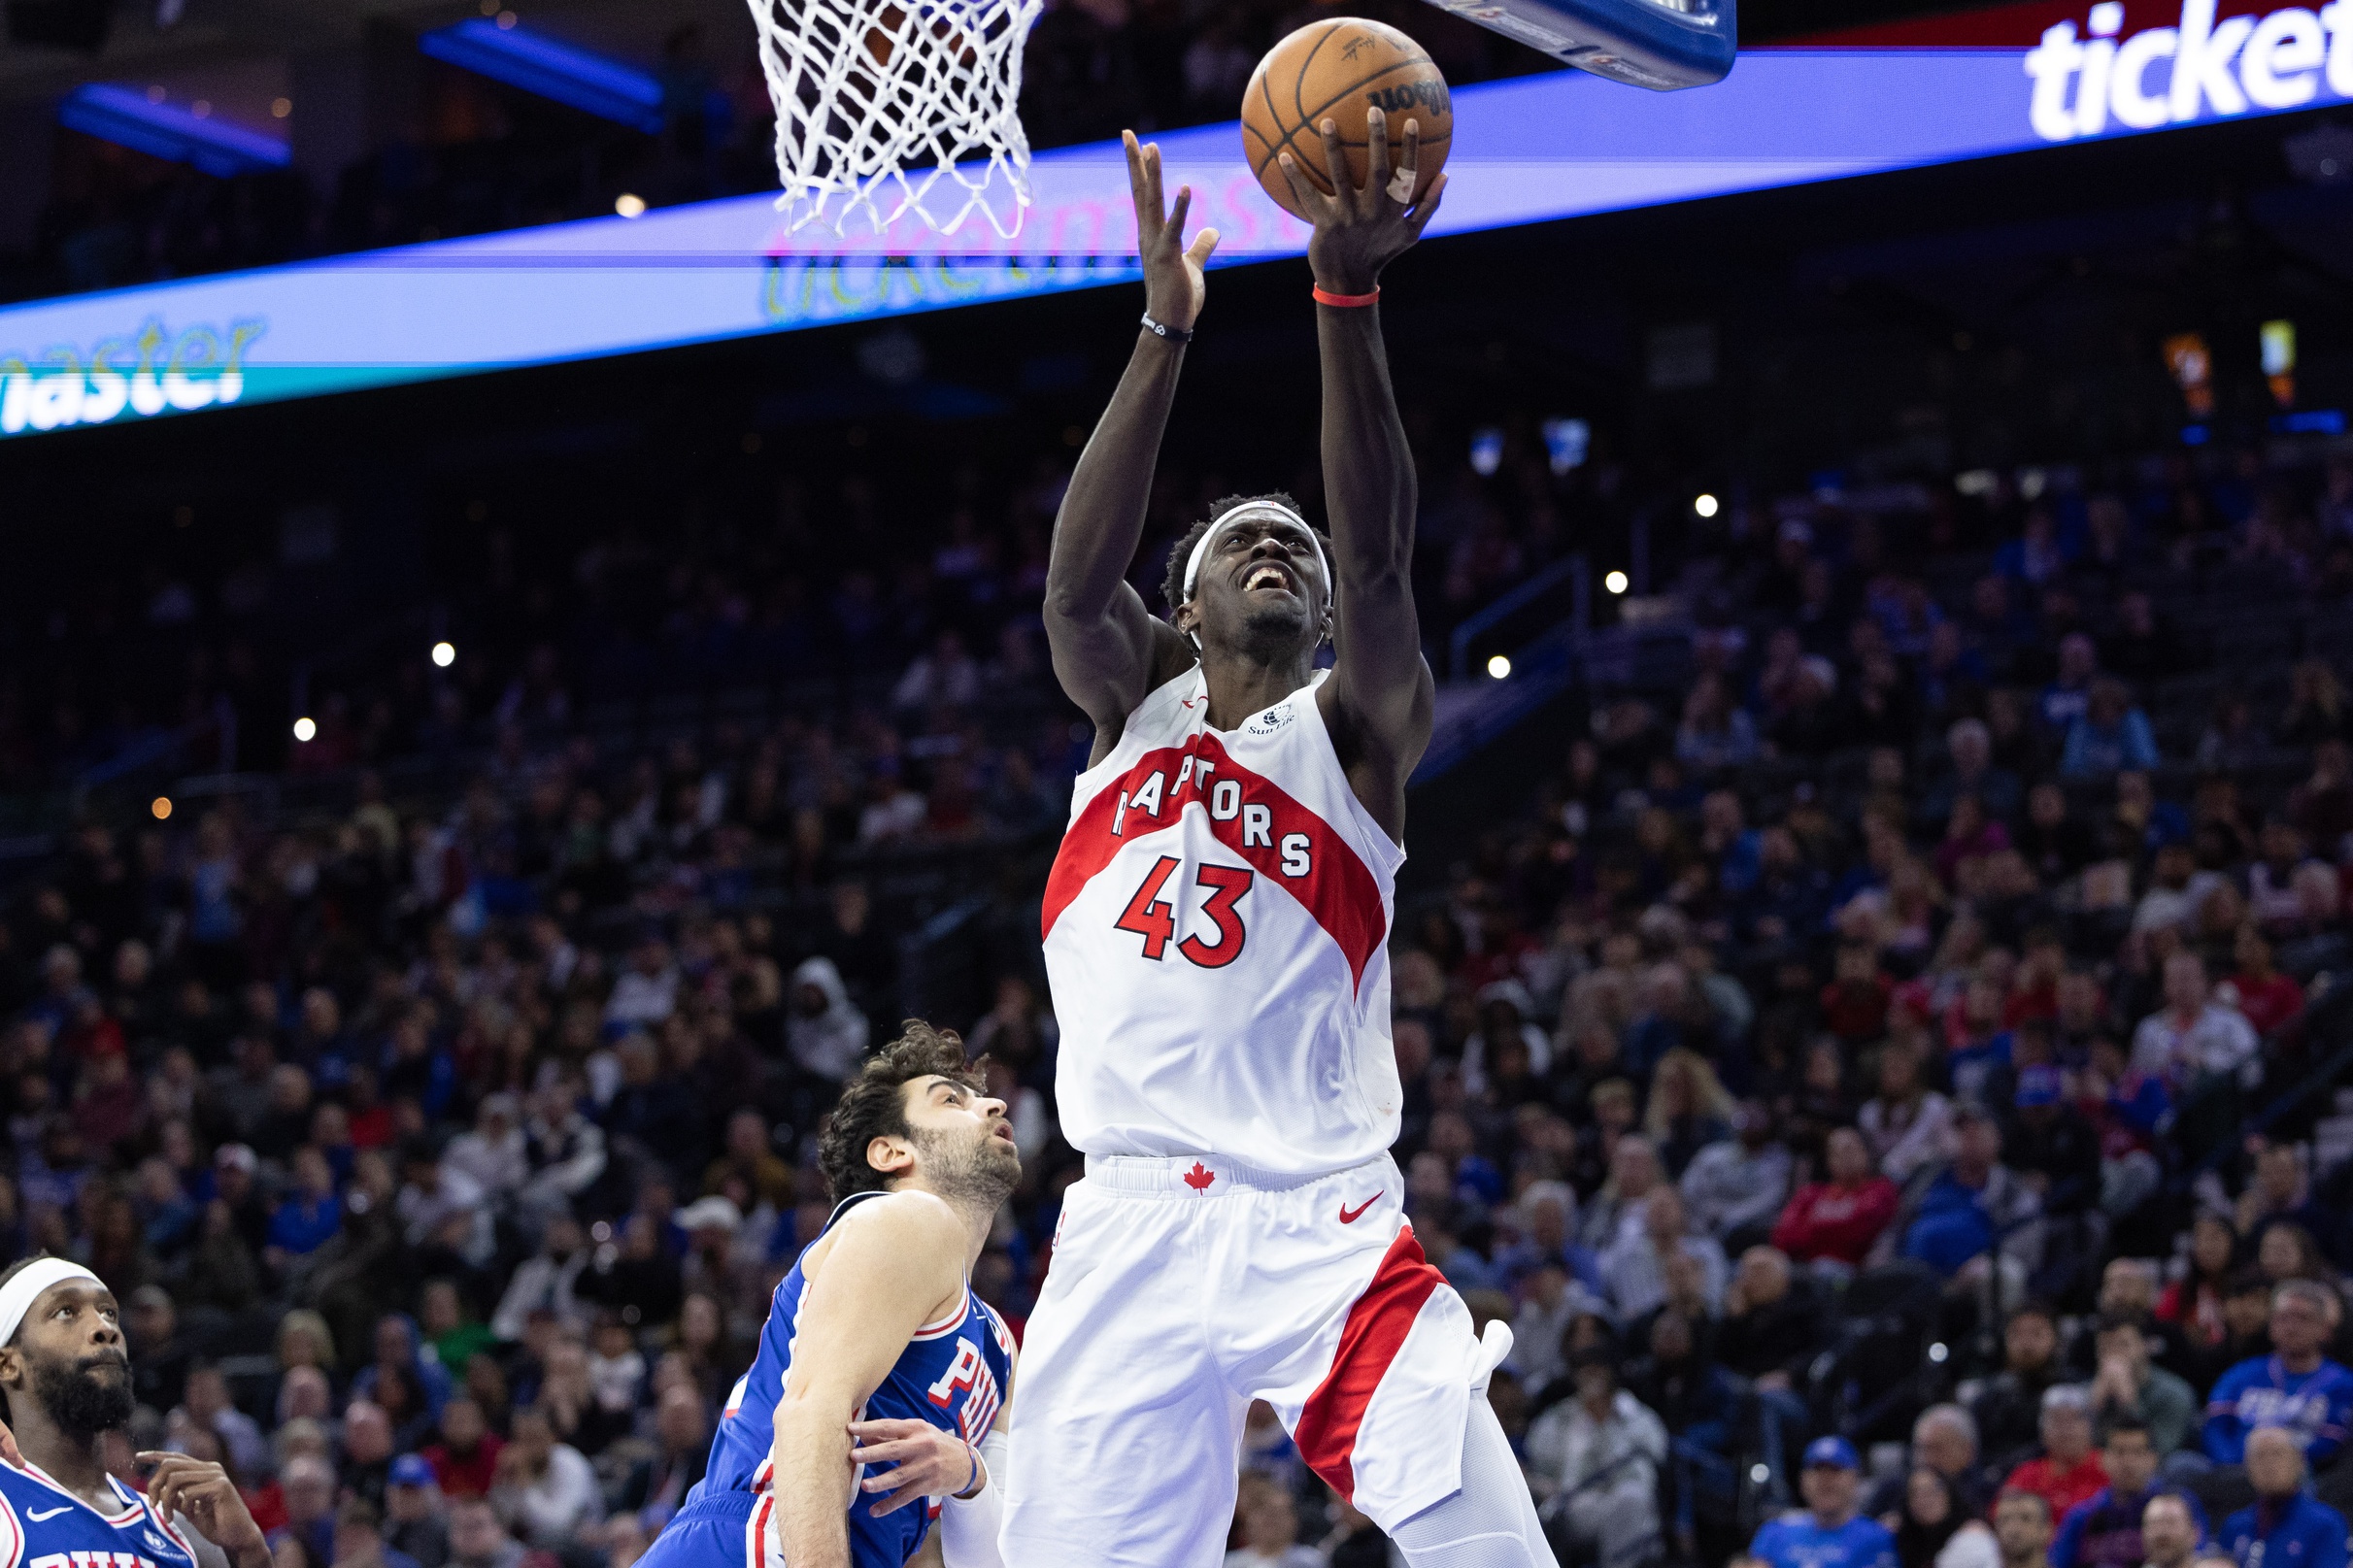 Former Raptors star Pascal Siakam returns to Toronto with the